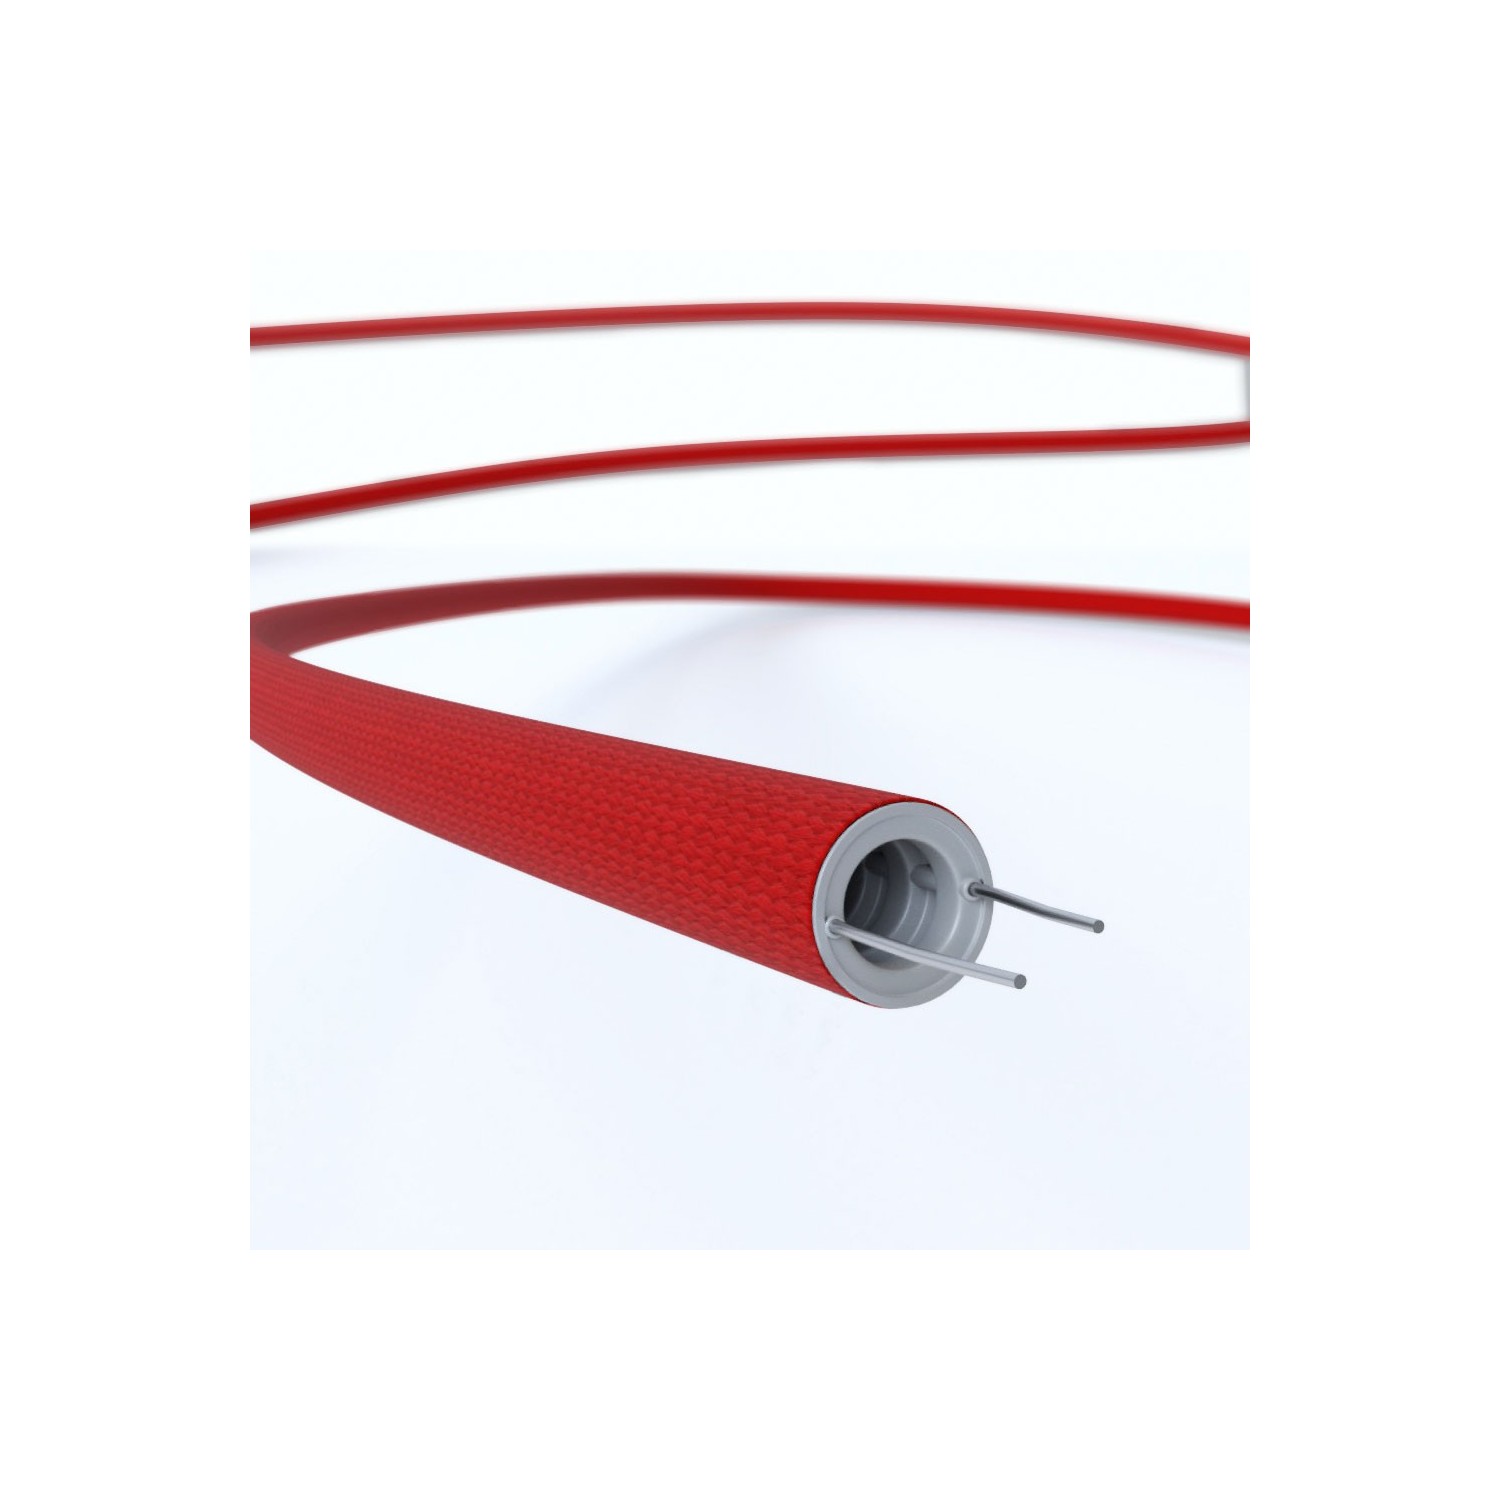 Creative-Tube flexible conduit, Rayon Red RM09 fabric covering, diameter 16 mm